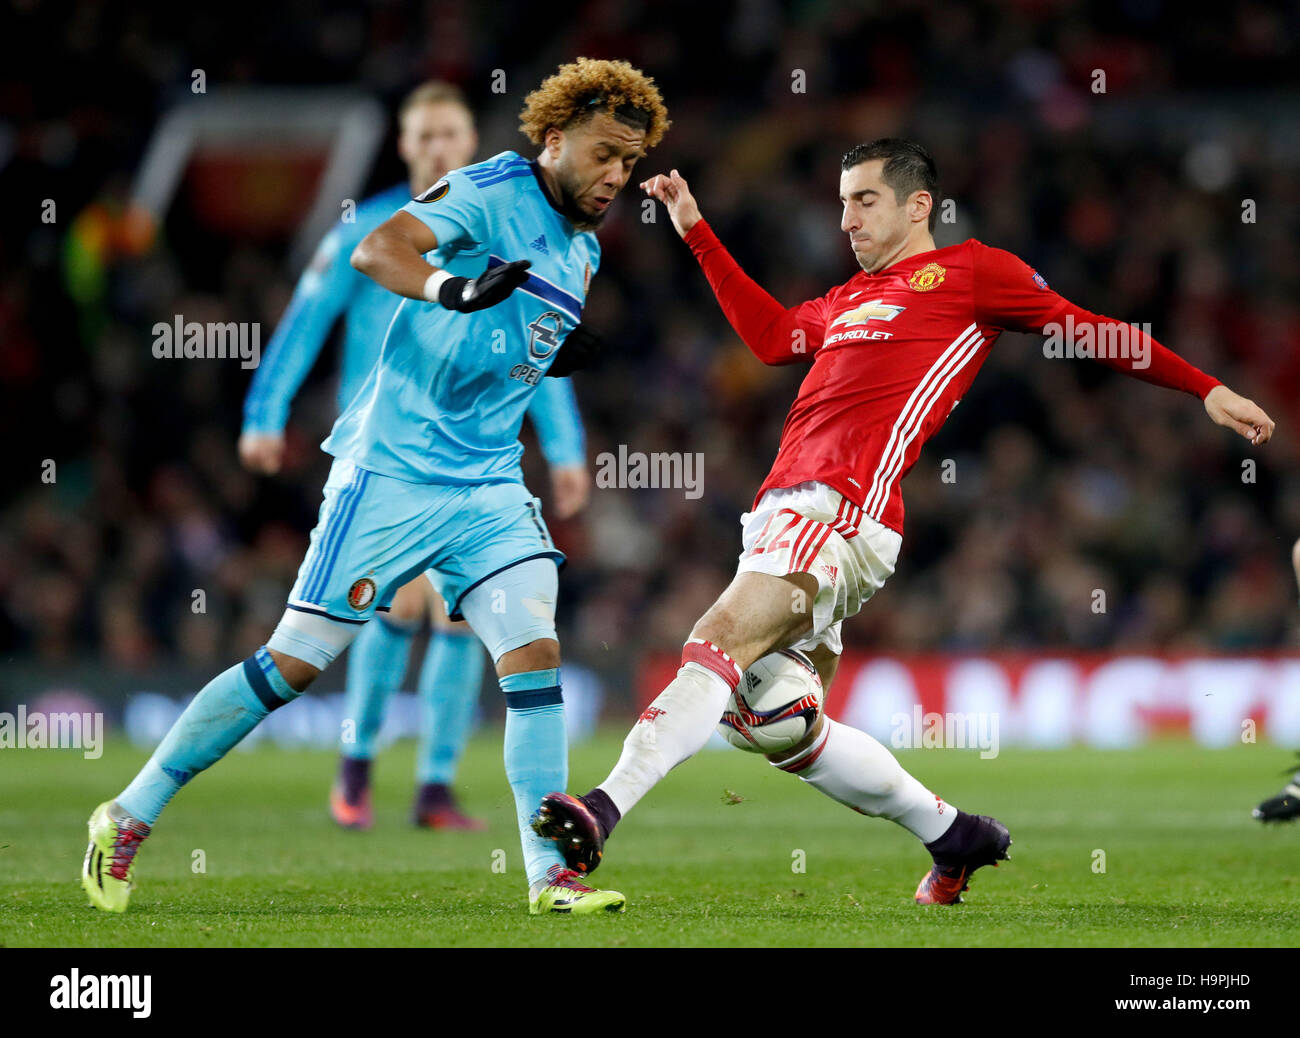 Manchester United's Henrikh Mkhitaryan (right) and Feyenoord's Renato Tapia (left) battle for the ball during the UEFA Europa League match at Old Trafford, Manchester. Stock Photo